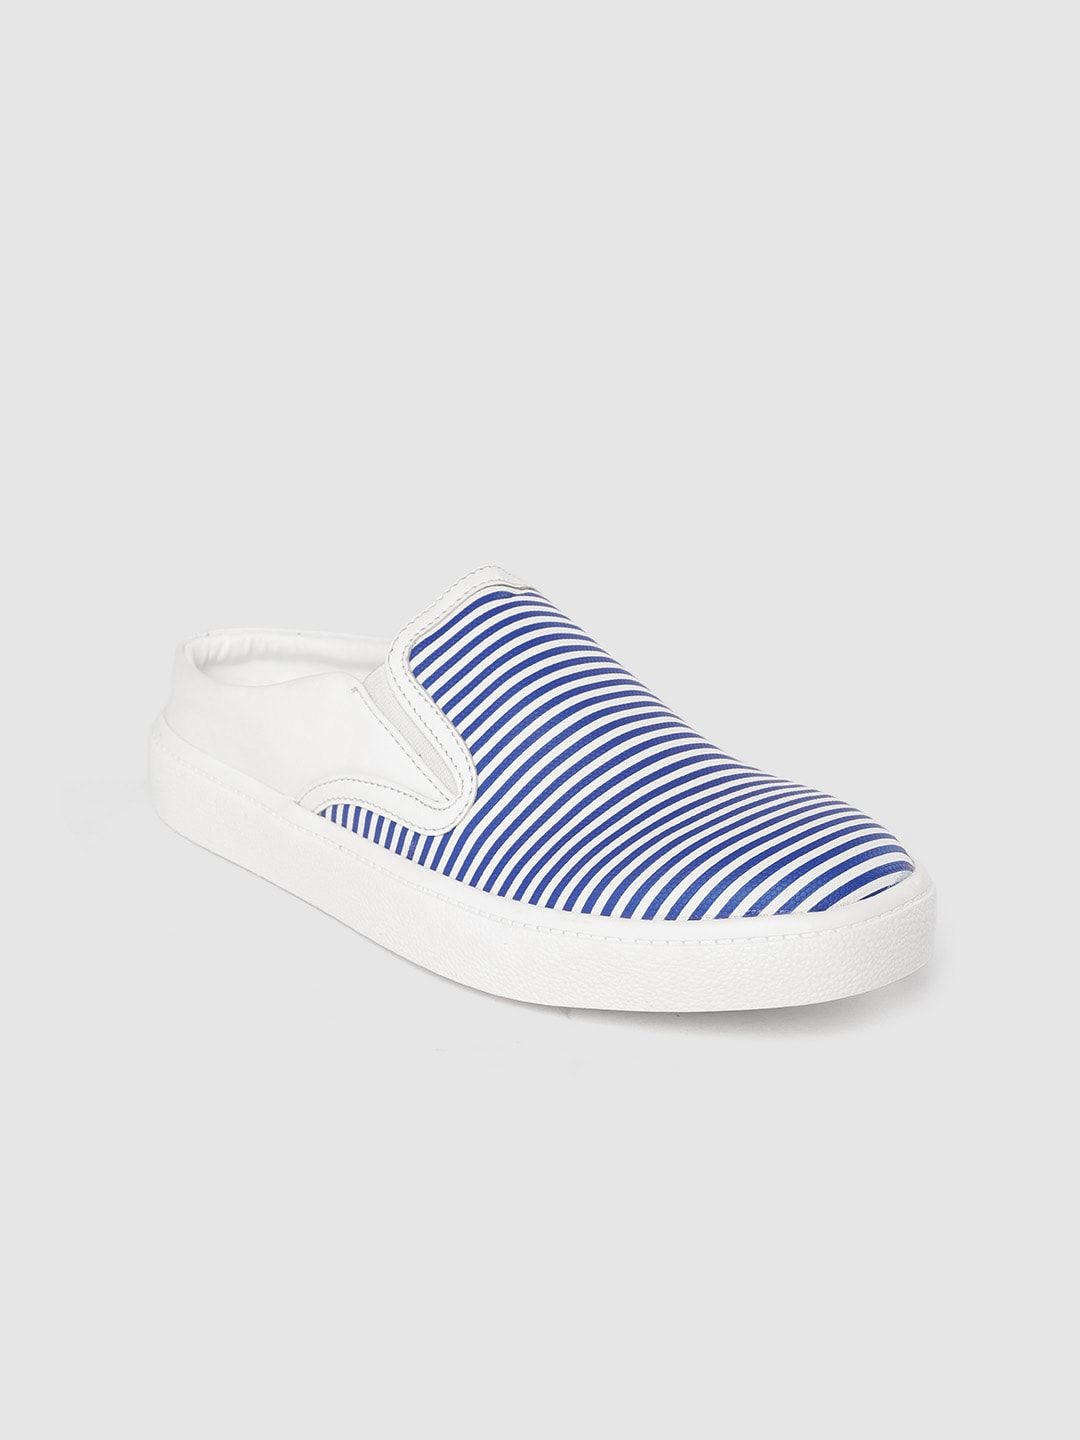 Mast & Harbour Women Blue & White Striped Mule Sneakers Price in India